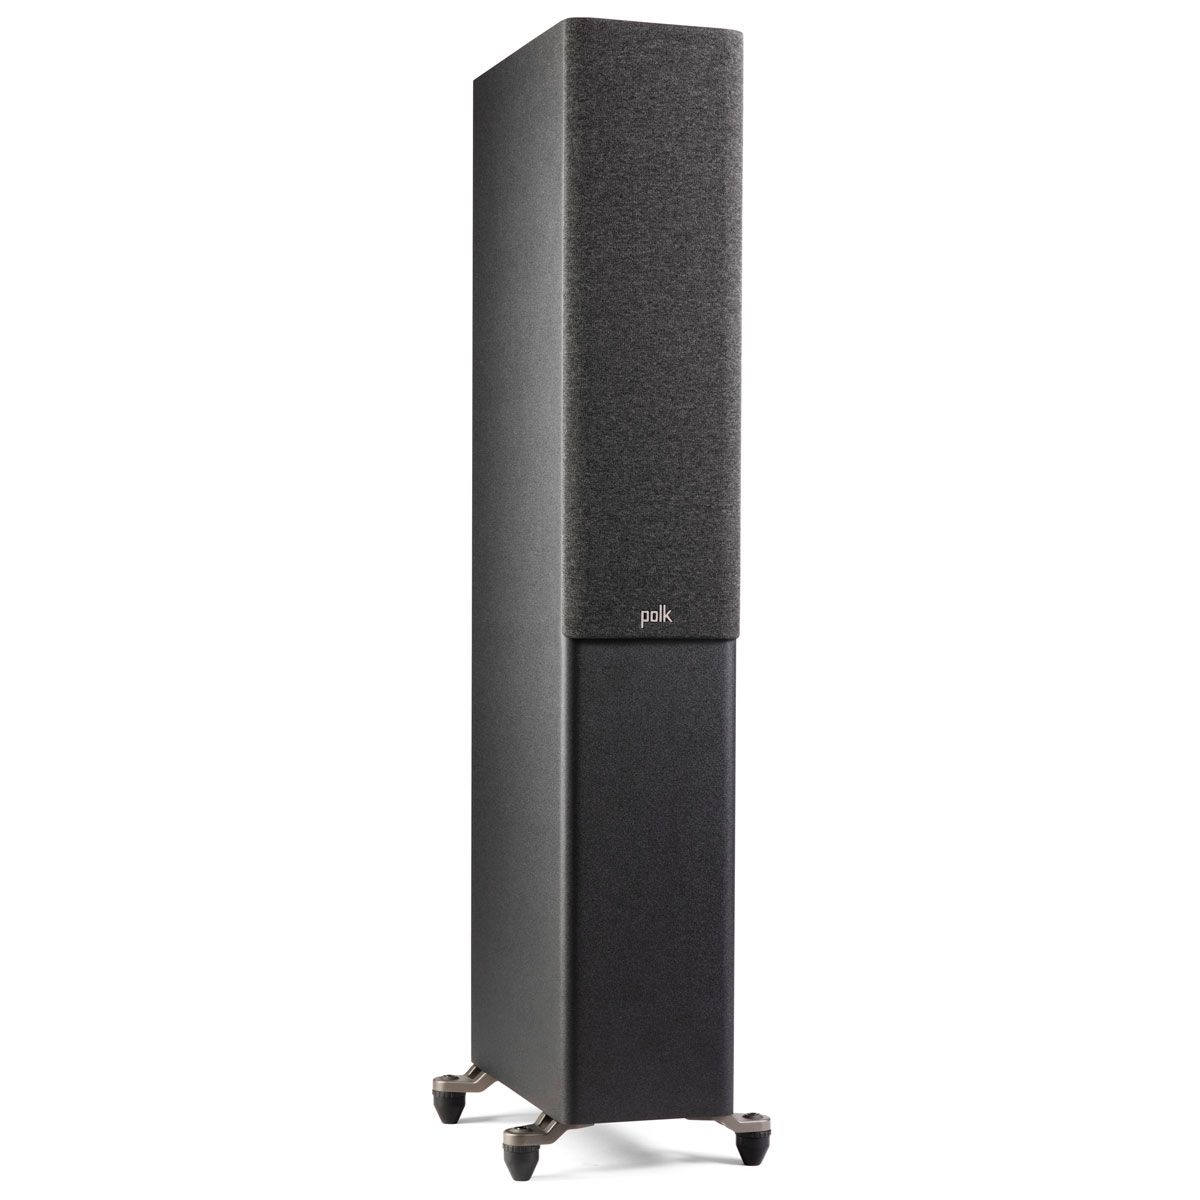 Polk Audio Reference R500 Floorstanding Speaker, Black, front right angle with grille